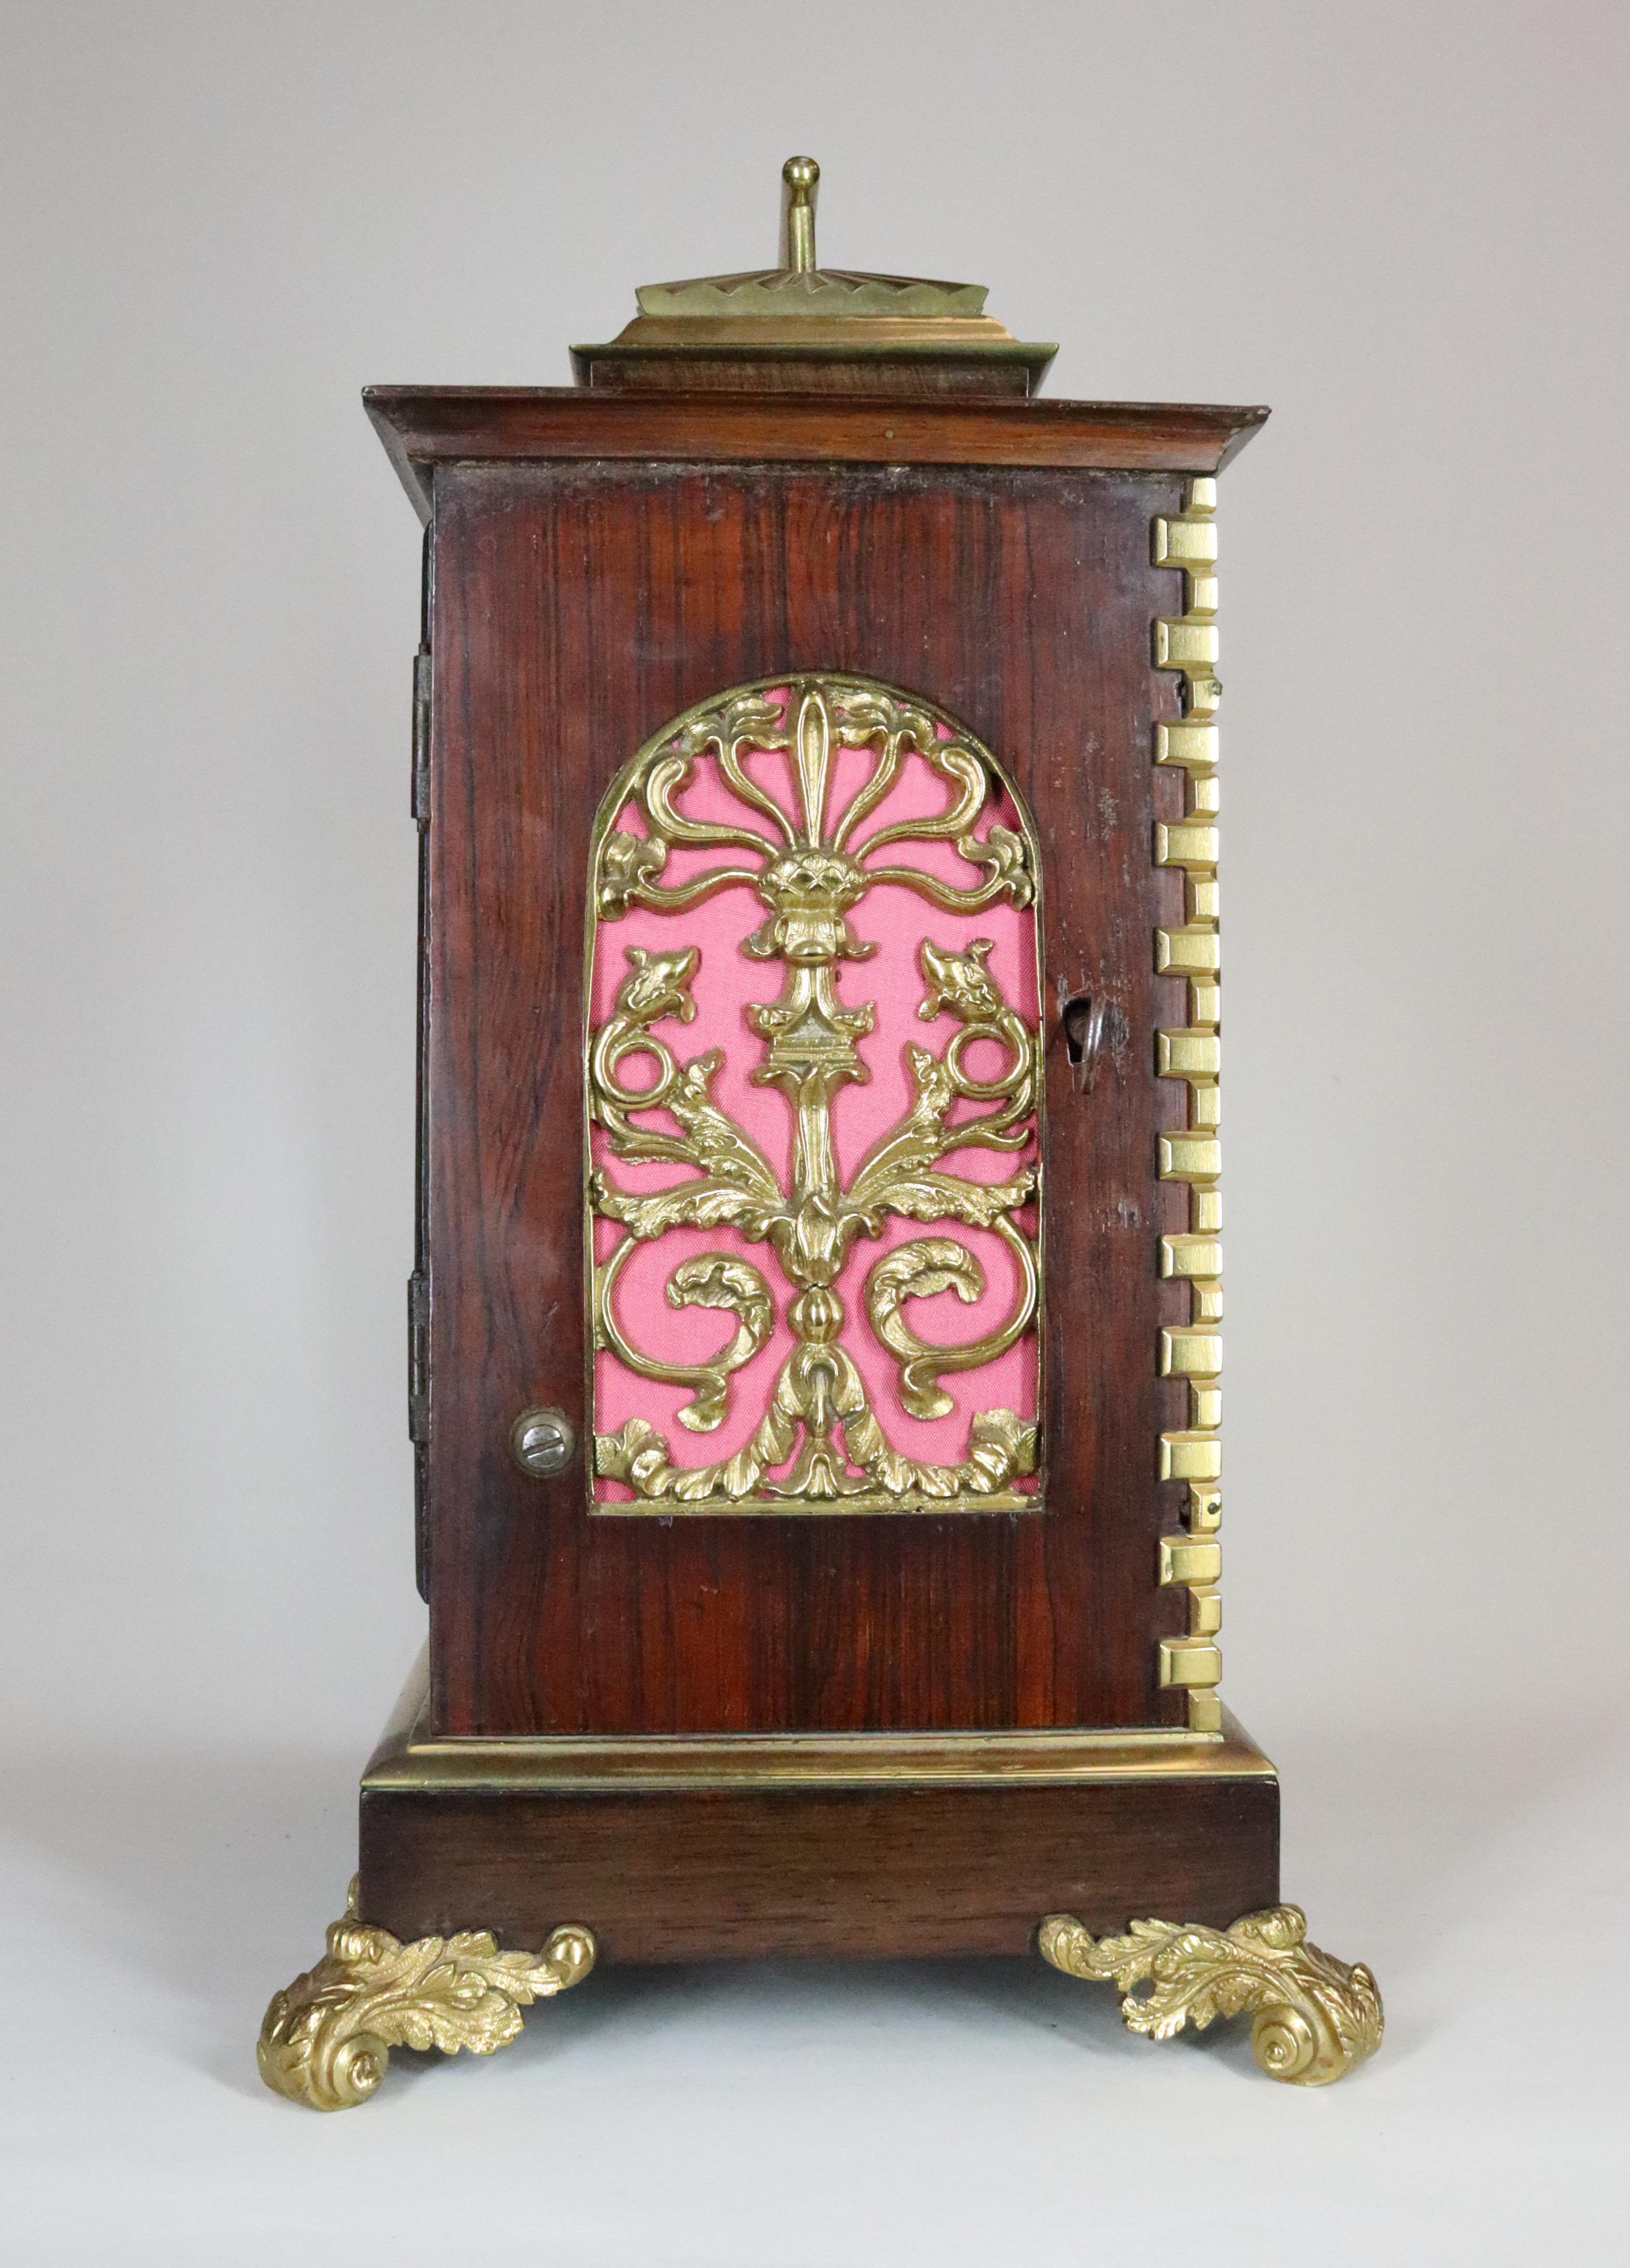 A Diminutive Bracket Clock by Adams of Lombard Street In Good Condition For Sale In Amersham, GB